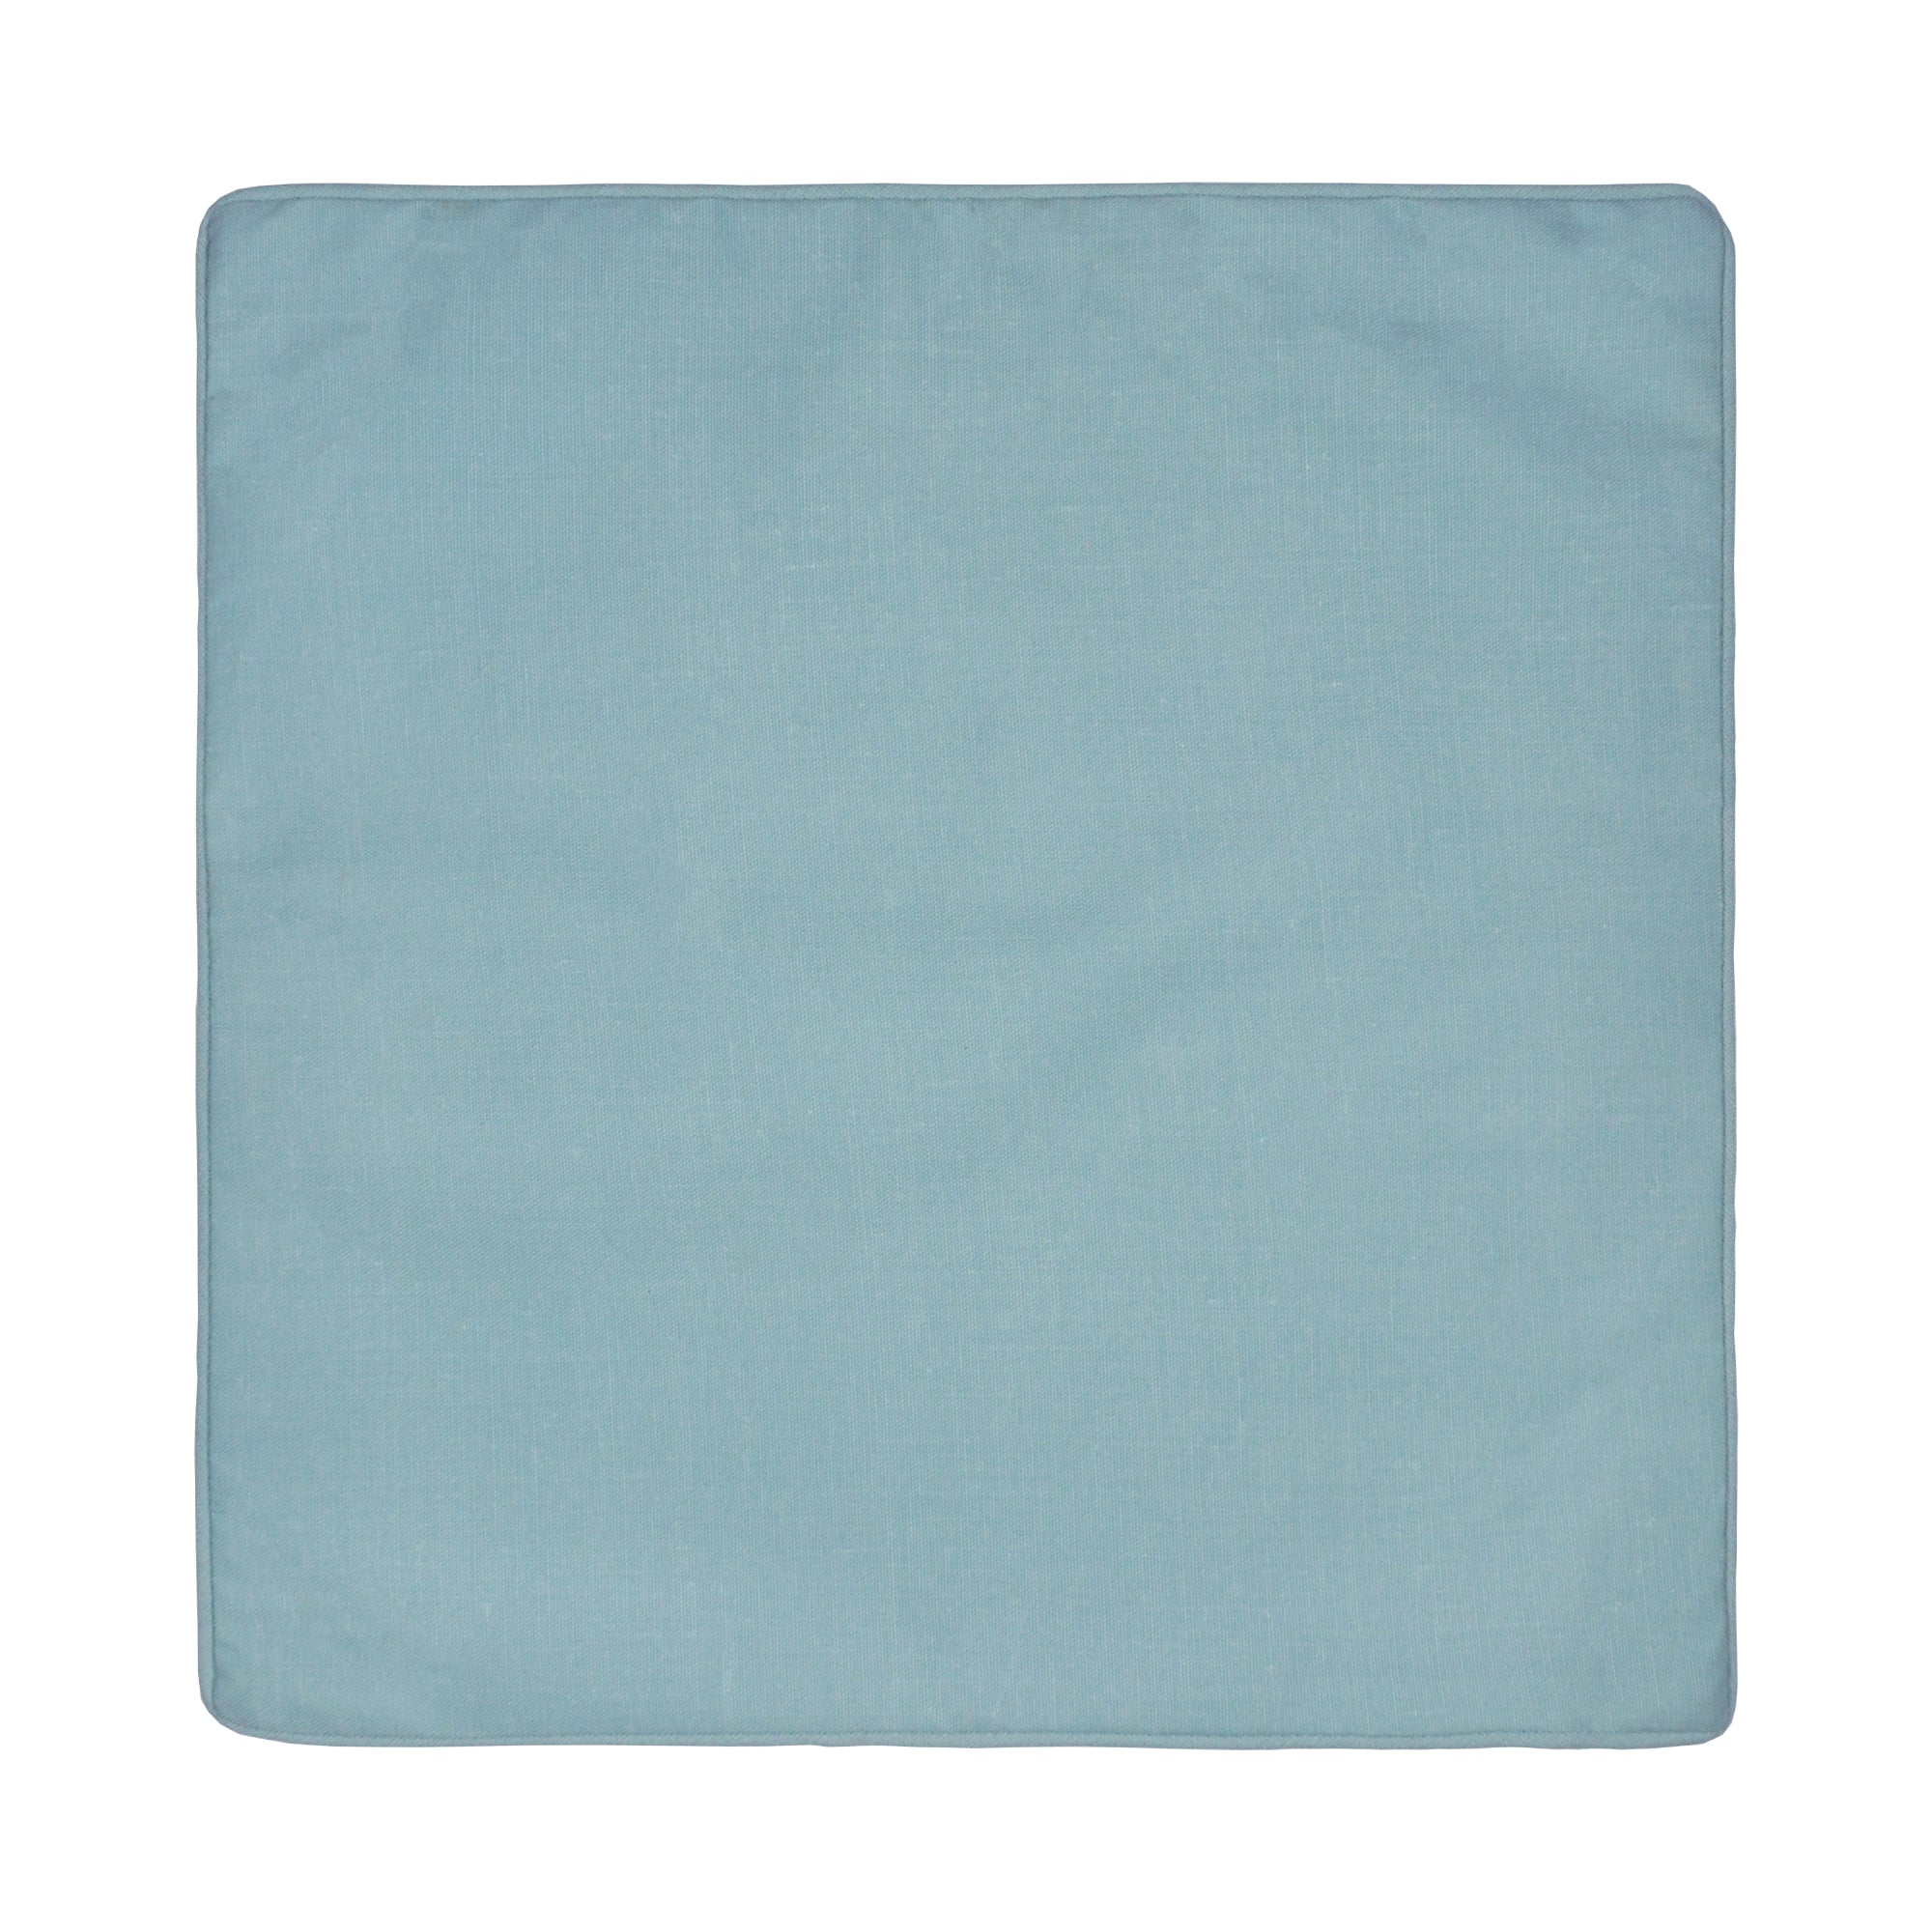 Filled Outdoor Cushion Plain Dye by Fusion in Teal